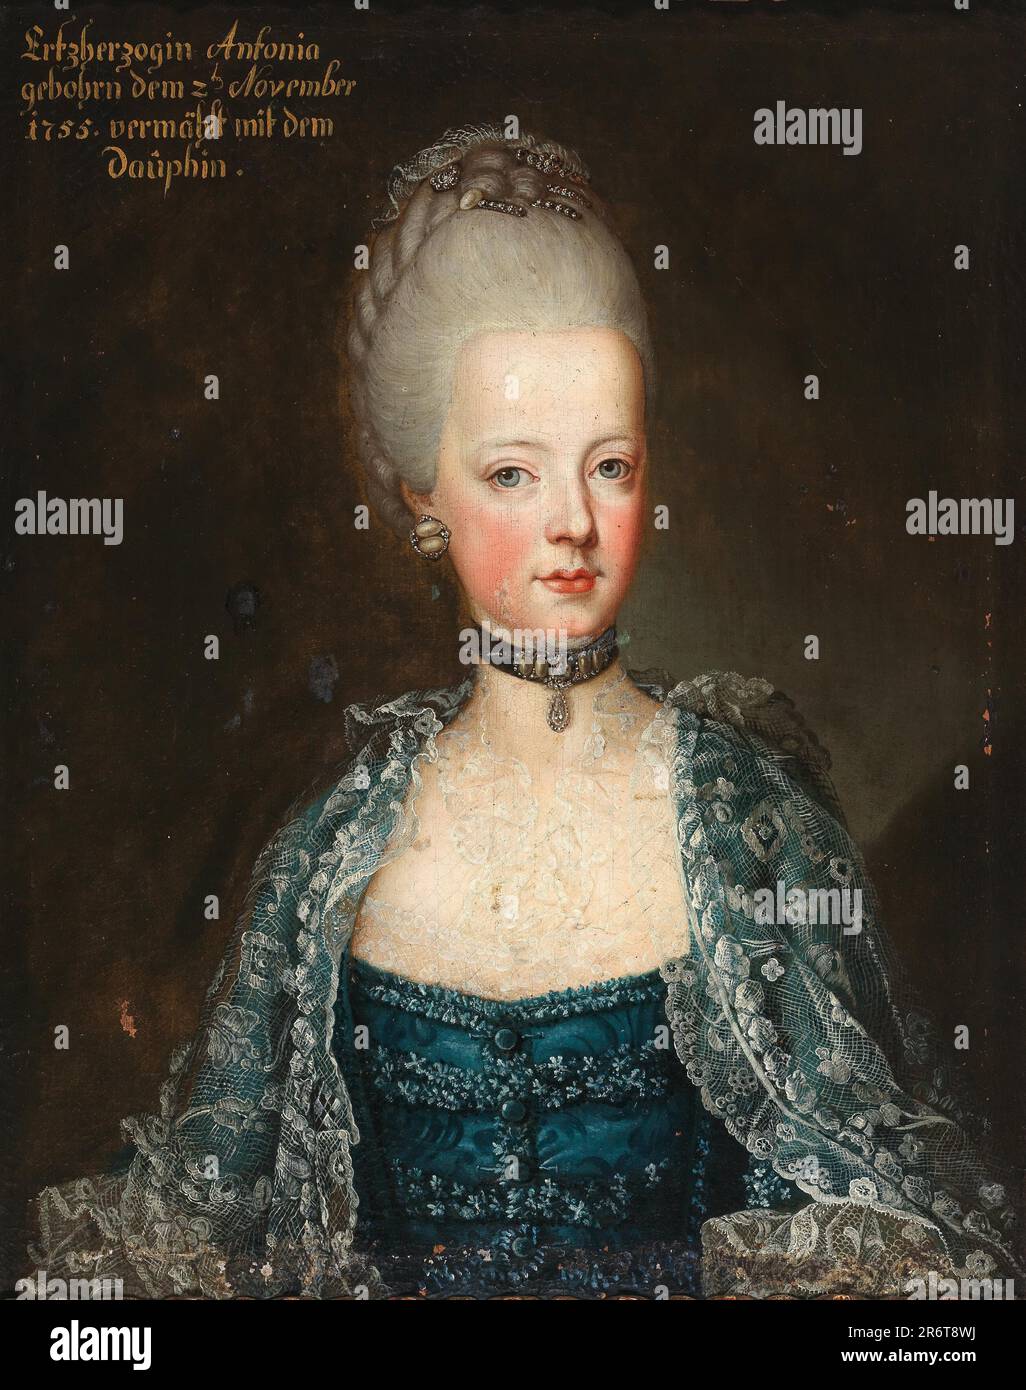 Portrait of Archduchess Maria Antonia (Marie-Antoinette) of Austria (1755-1793), Queen of France. Museum: PRIVATE COLLECTION. Author: ANONYMOUS. Stock Photo